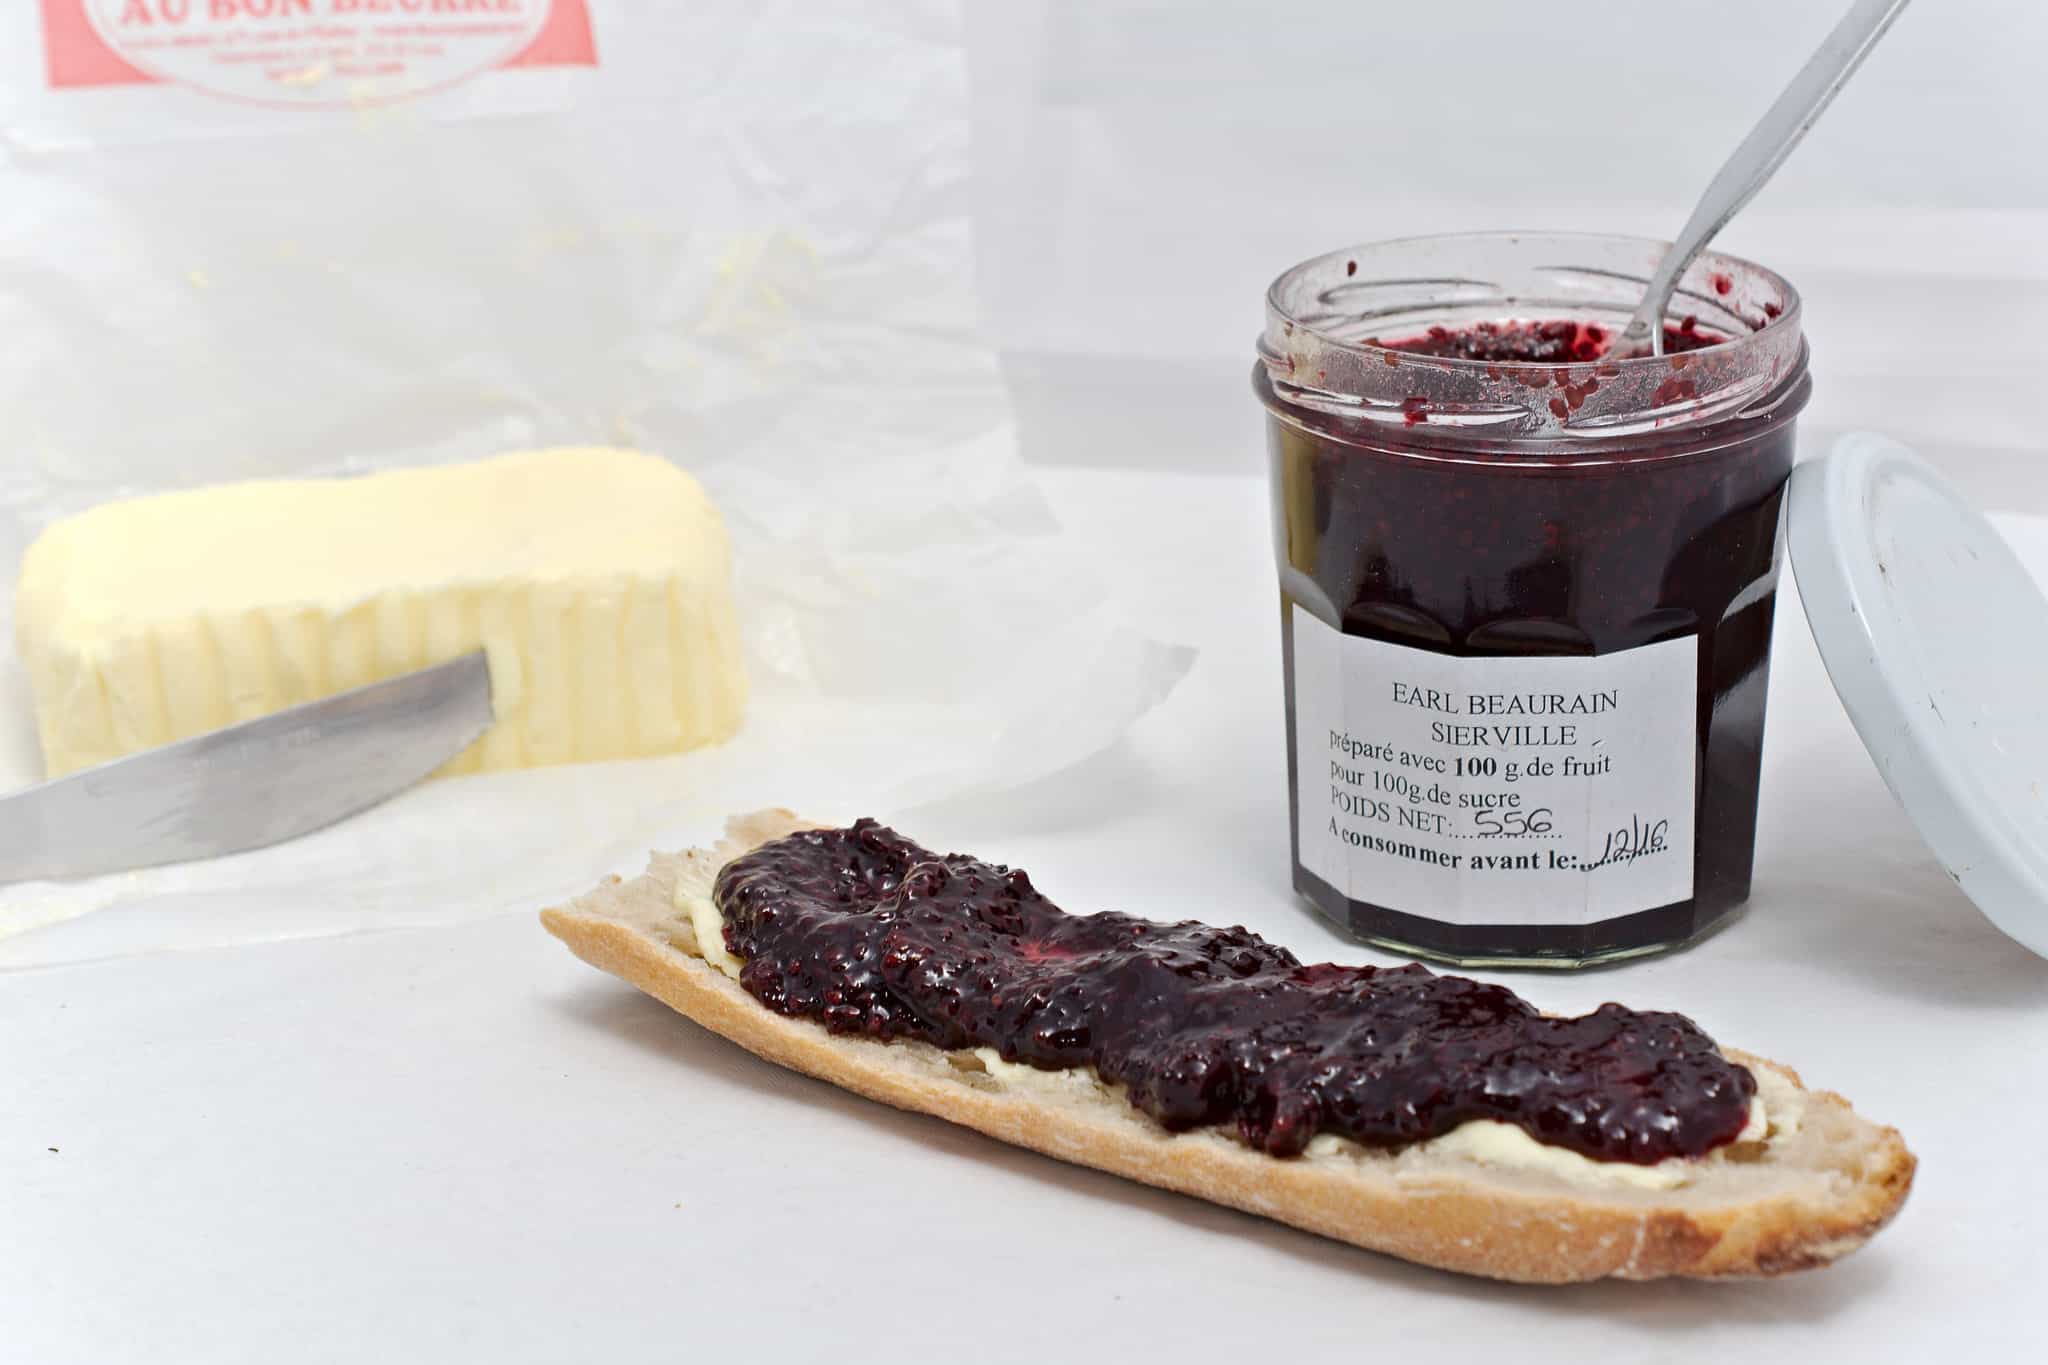 Why does French butter taste so good? Because it's homemade and teamed with artisanal jam on a baguette, it's even better.